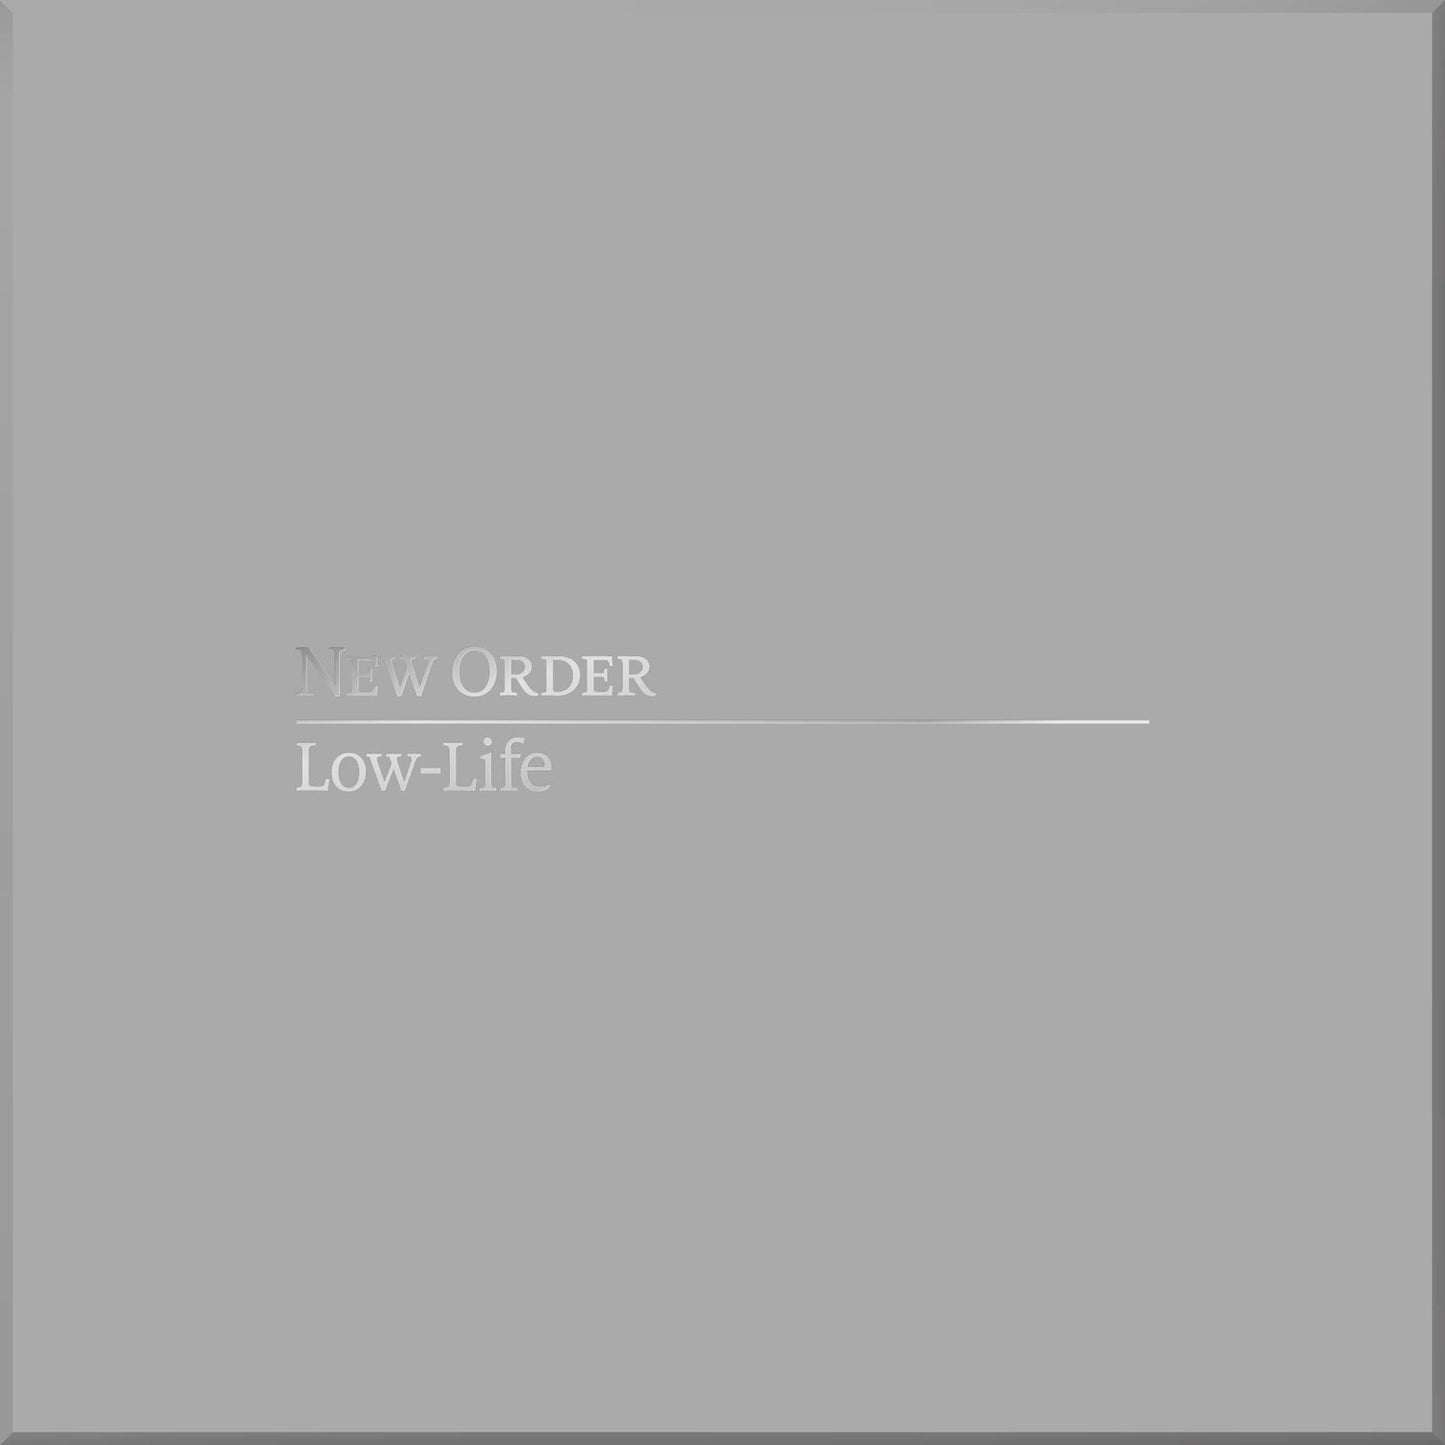 New Order - Low Life (Definitive Edition) - 2CD/2DVD/LP